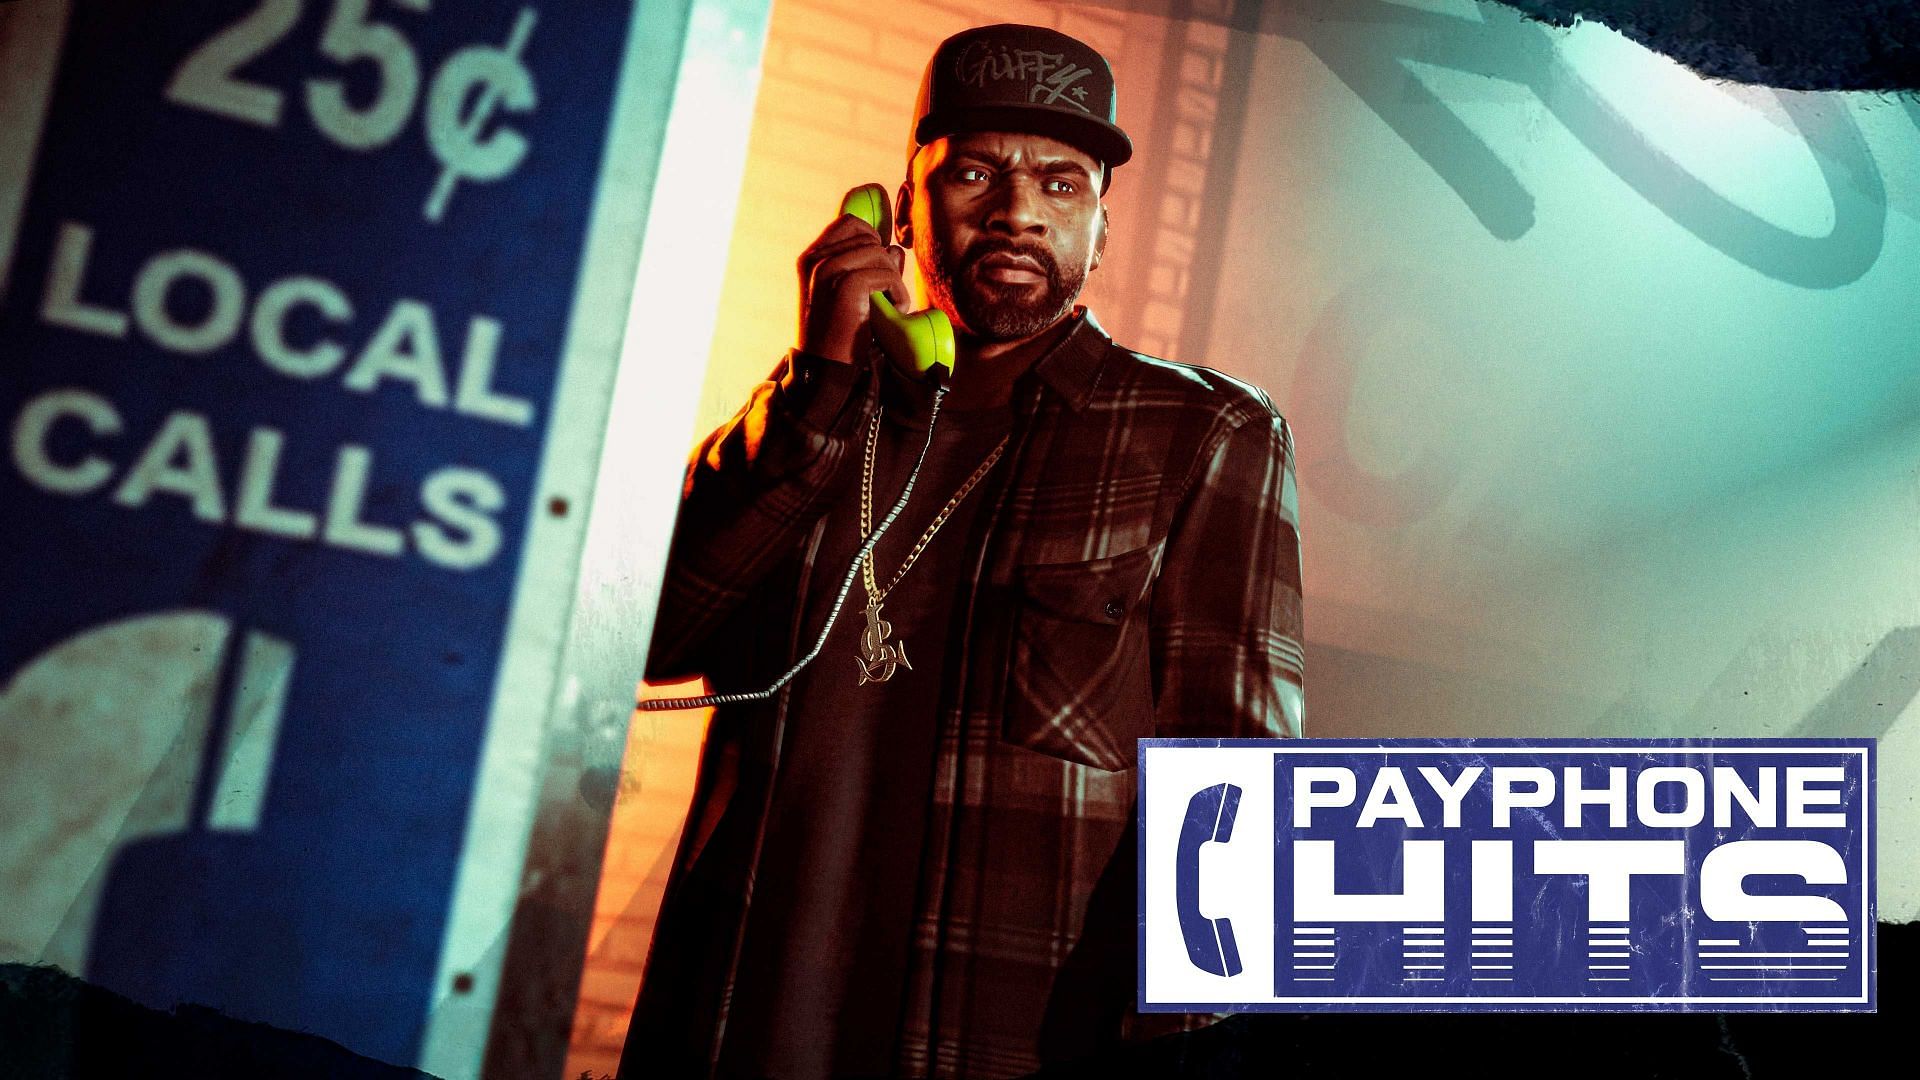 These missions involve Franklin giving instructions to the player over a payphone (Image via Rockstar Games)